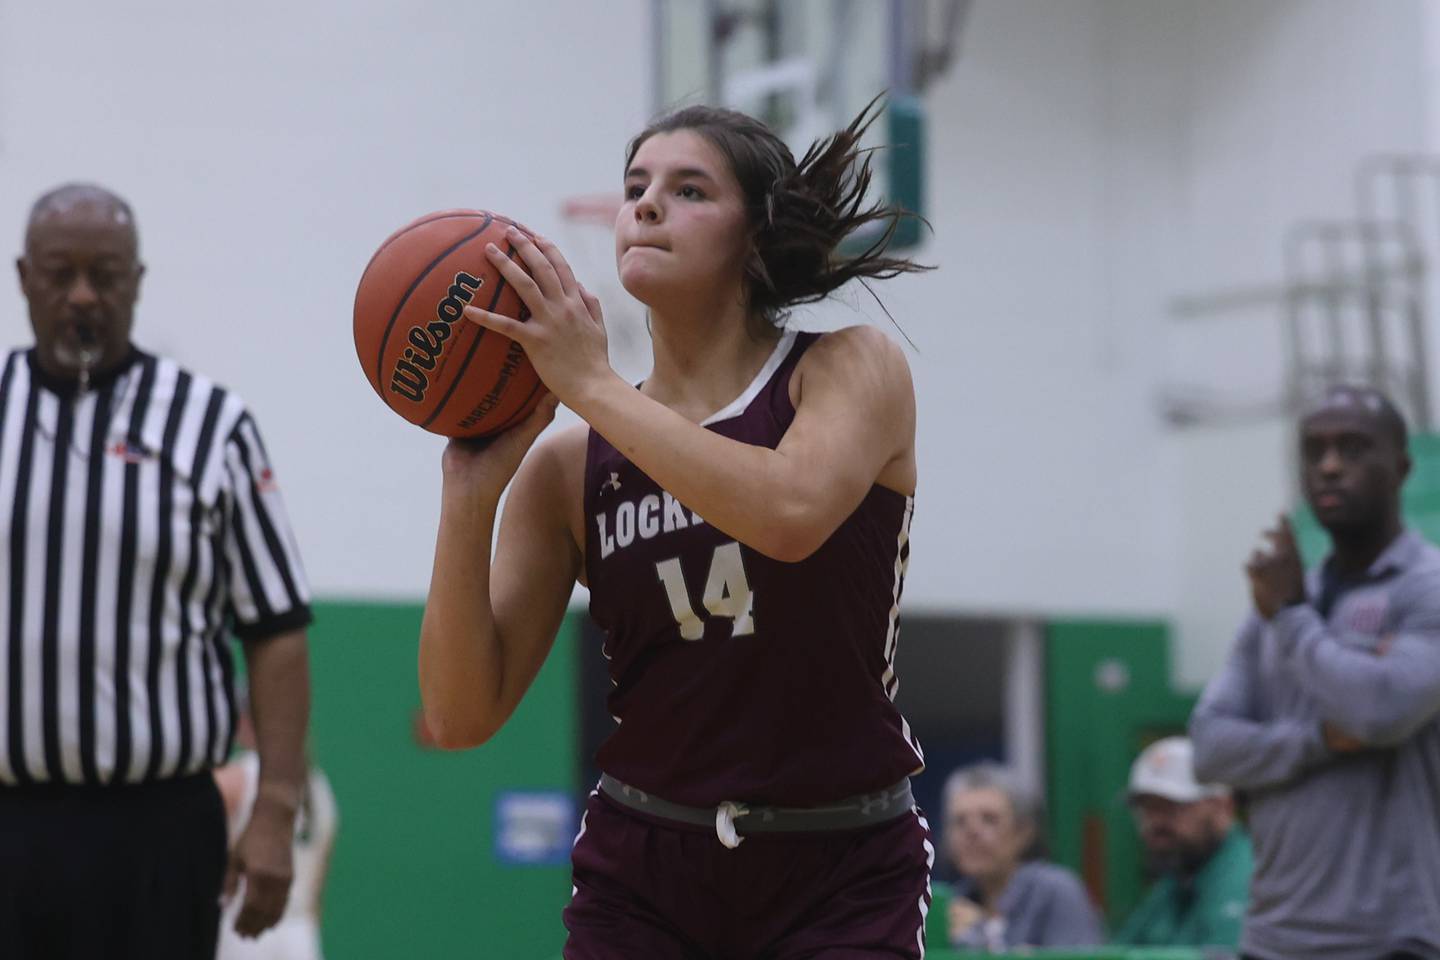 Lockport’s Veronica Bafia puts up the three point shot against Providence.